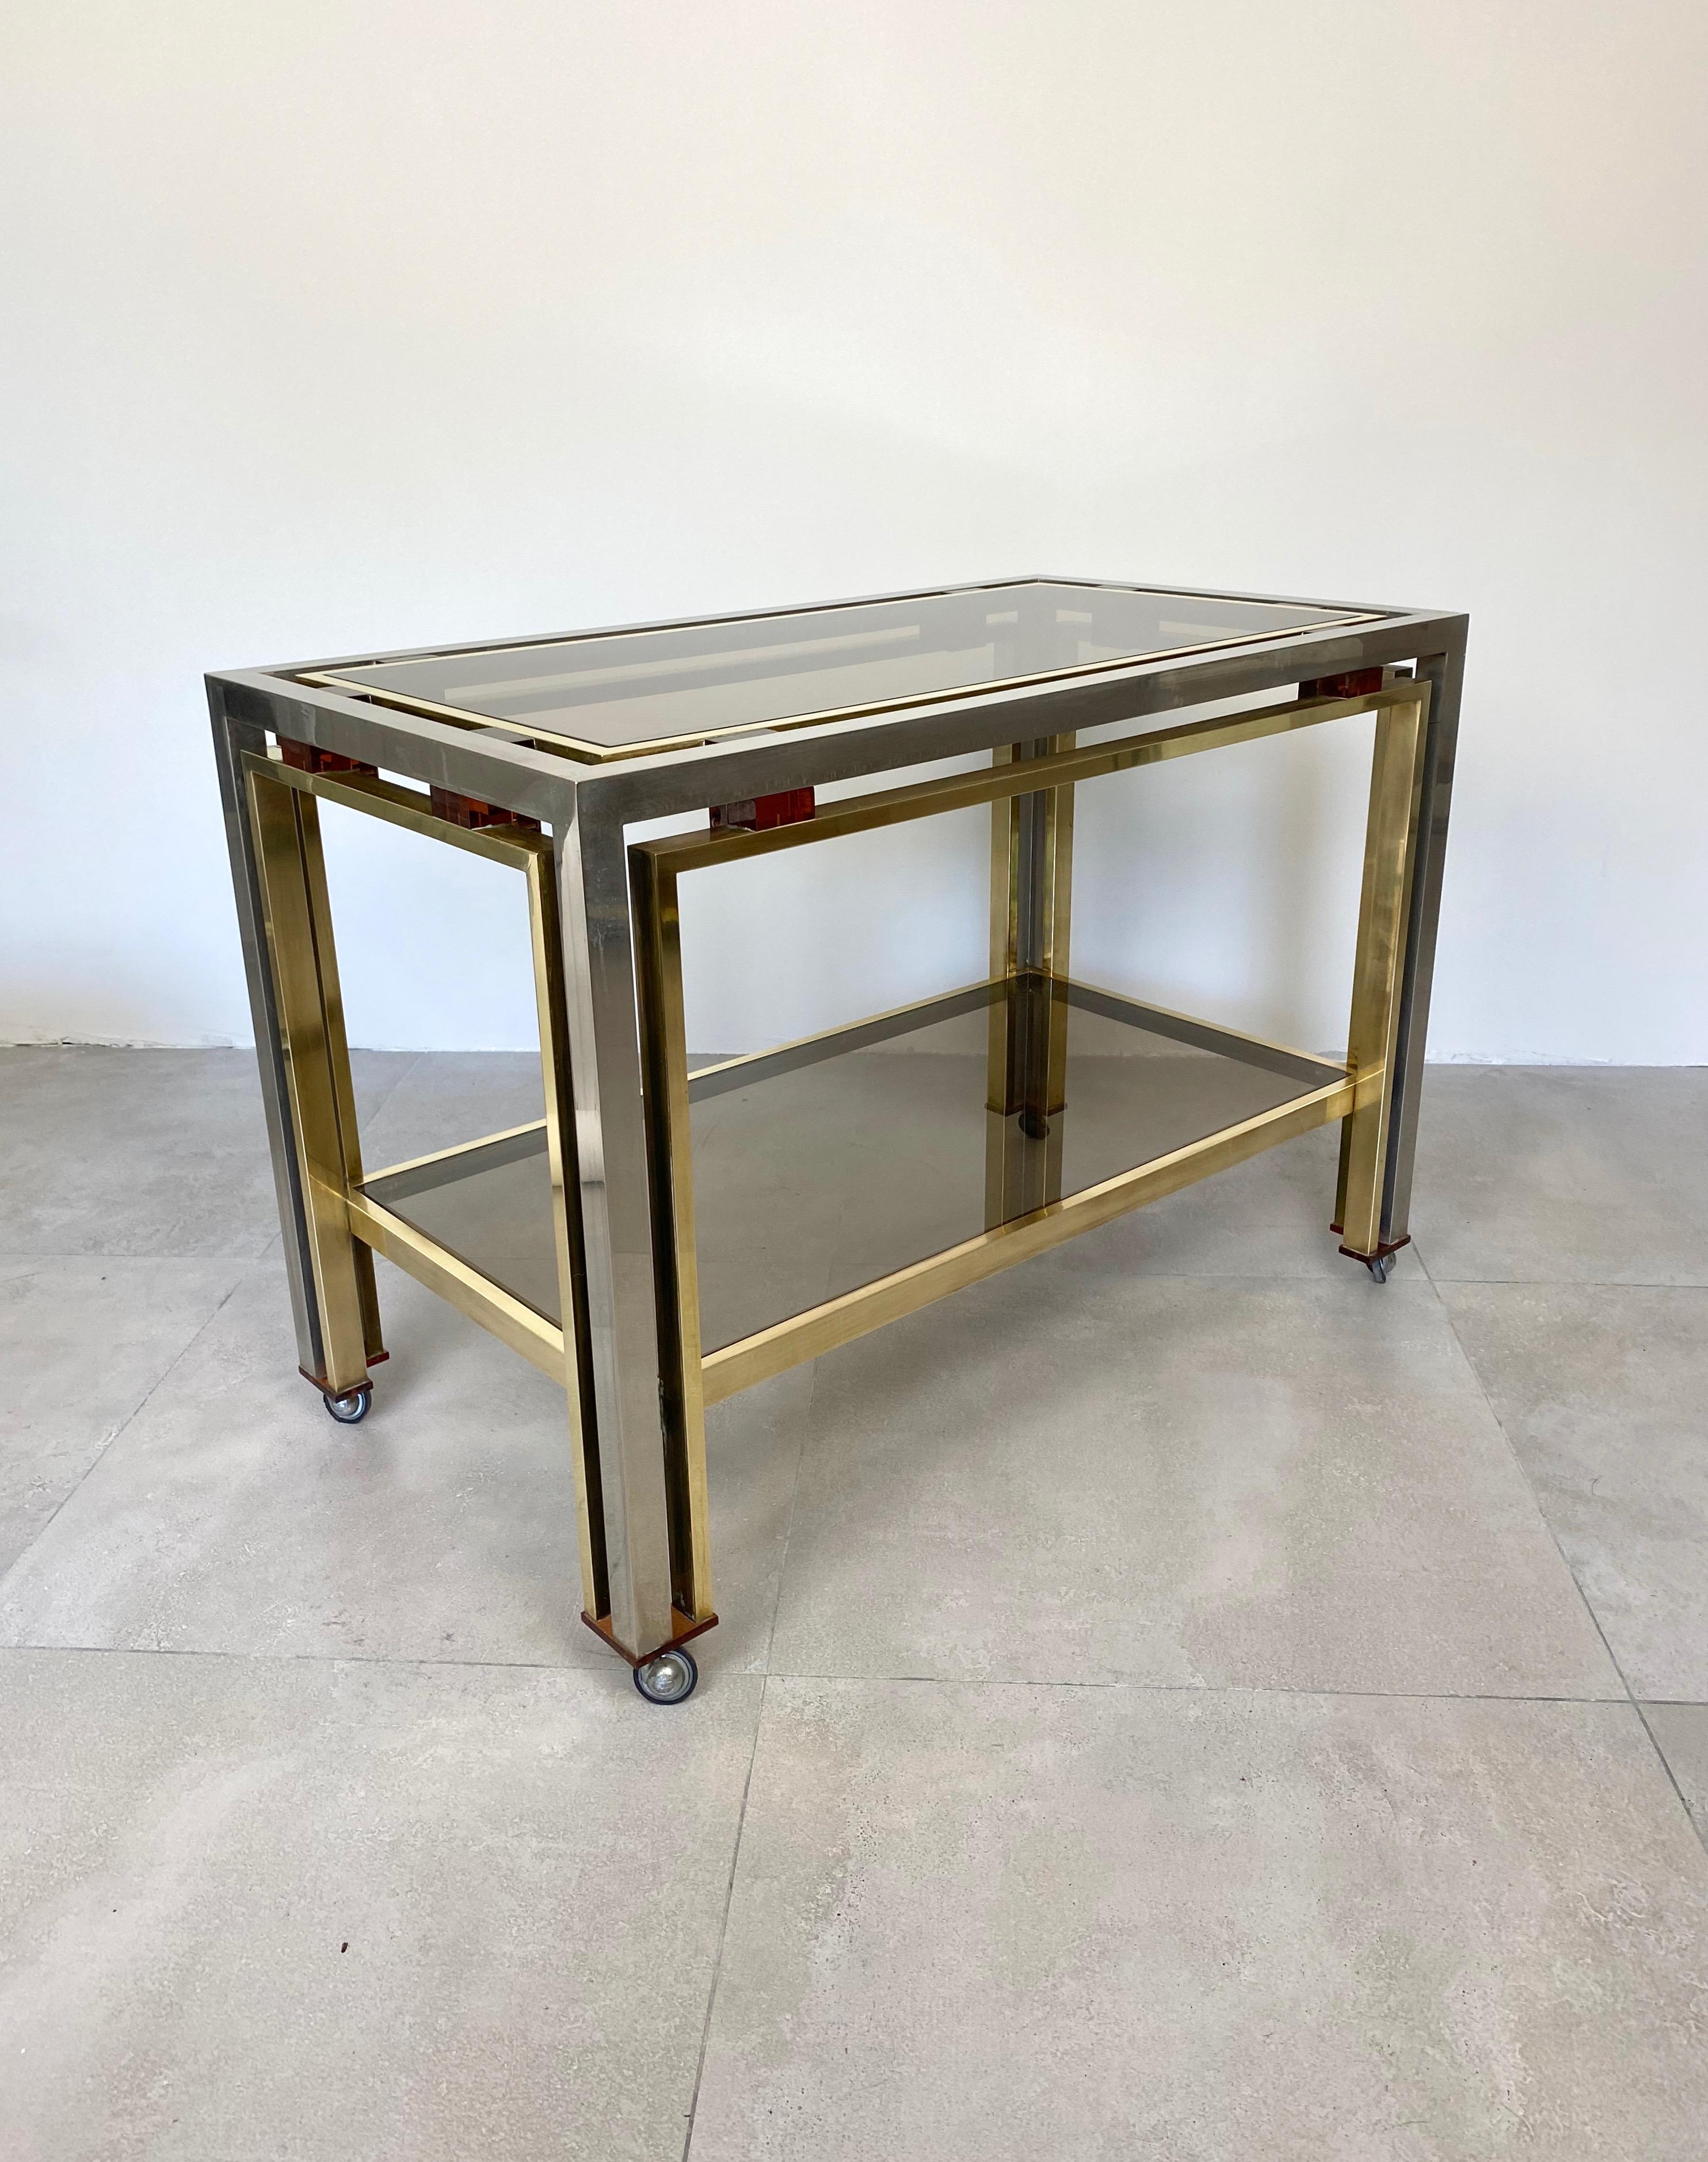 Romeo Rega Cart Table in Chrome, Lucite and Brass, Italy, 1970s For Sale 1